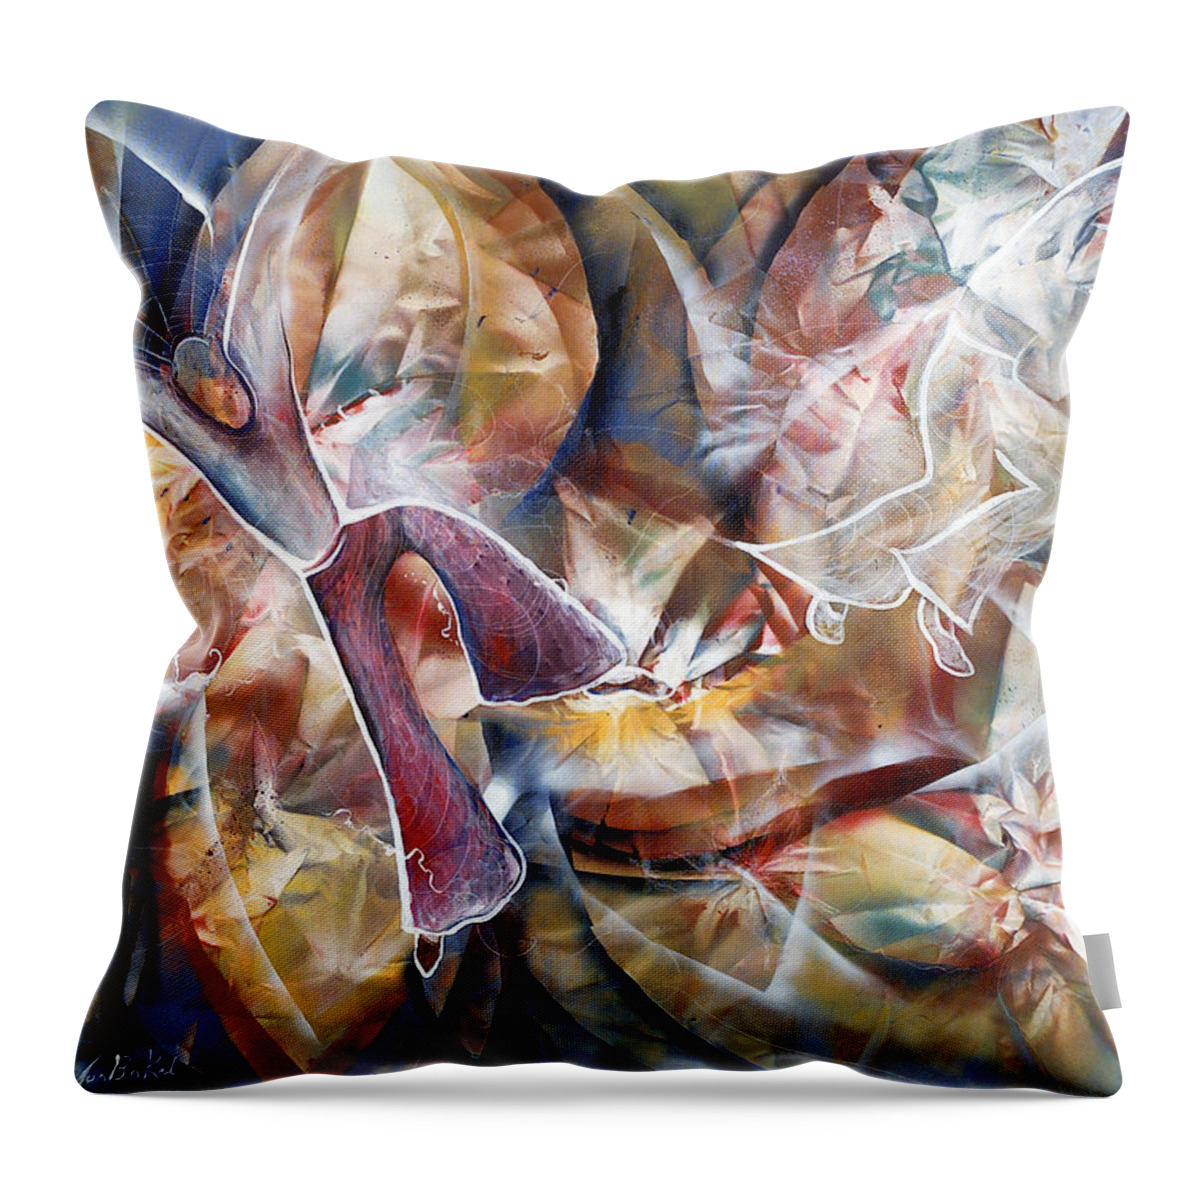 Two Figures Throw Pillow featuring the painting Brothers by Jan VonBokel